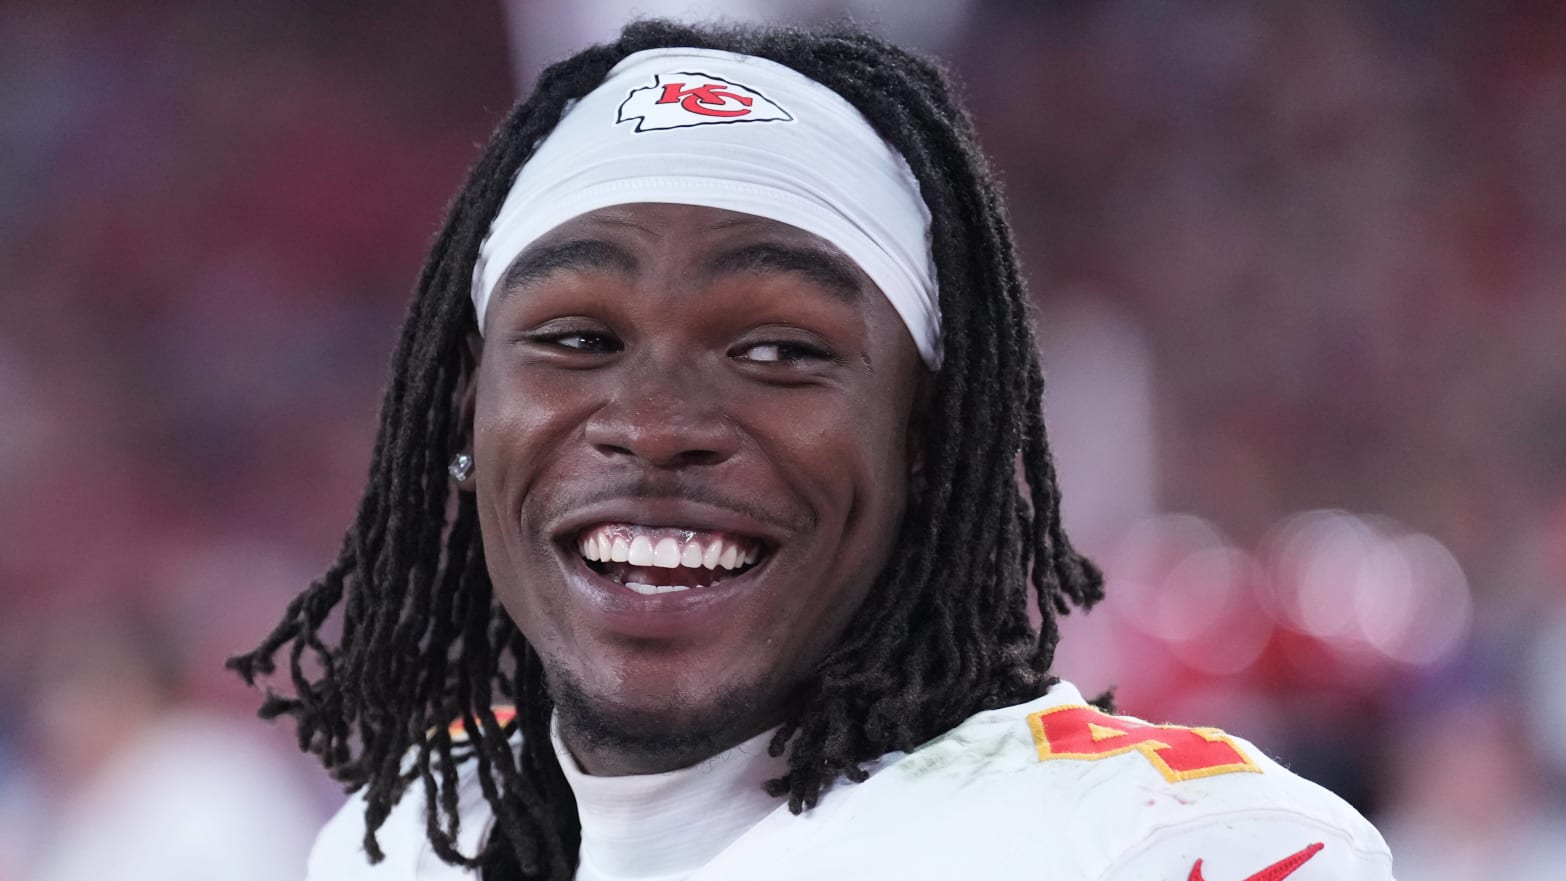 Rashee Rice, the Kansas City Chiefs star, is facing eight felony counts after a warrant has been issued for his arrest in connection with a multi-vehicle crash in Dallas.